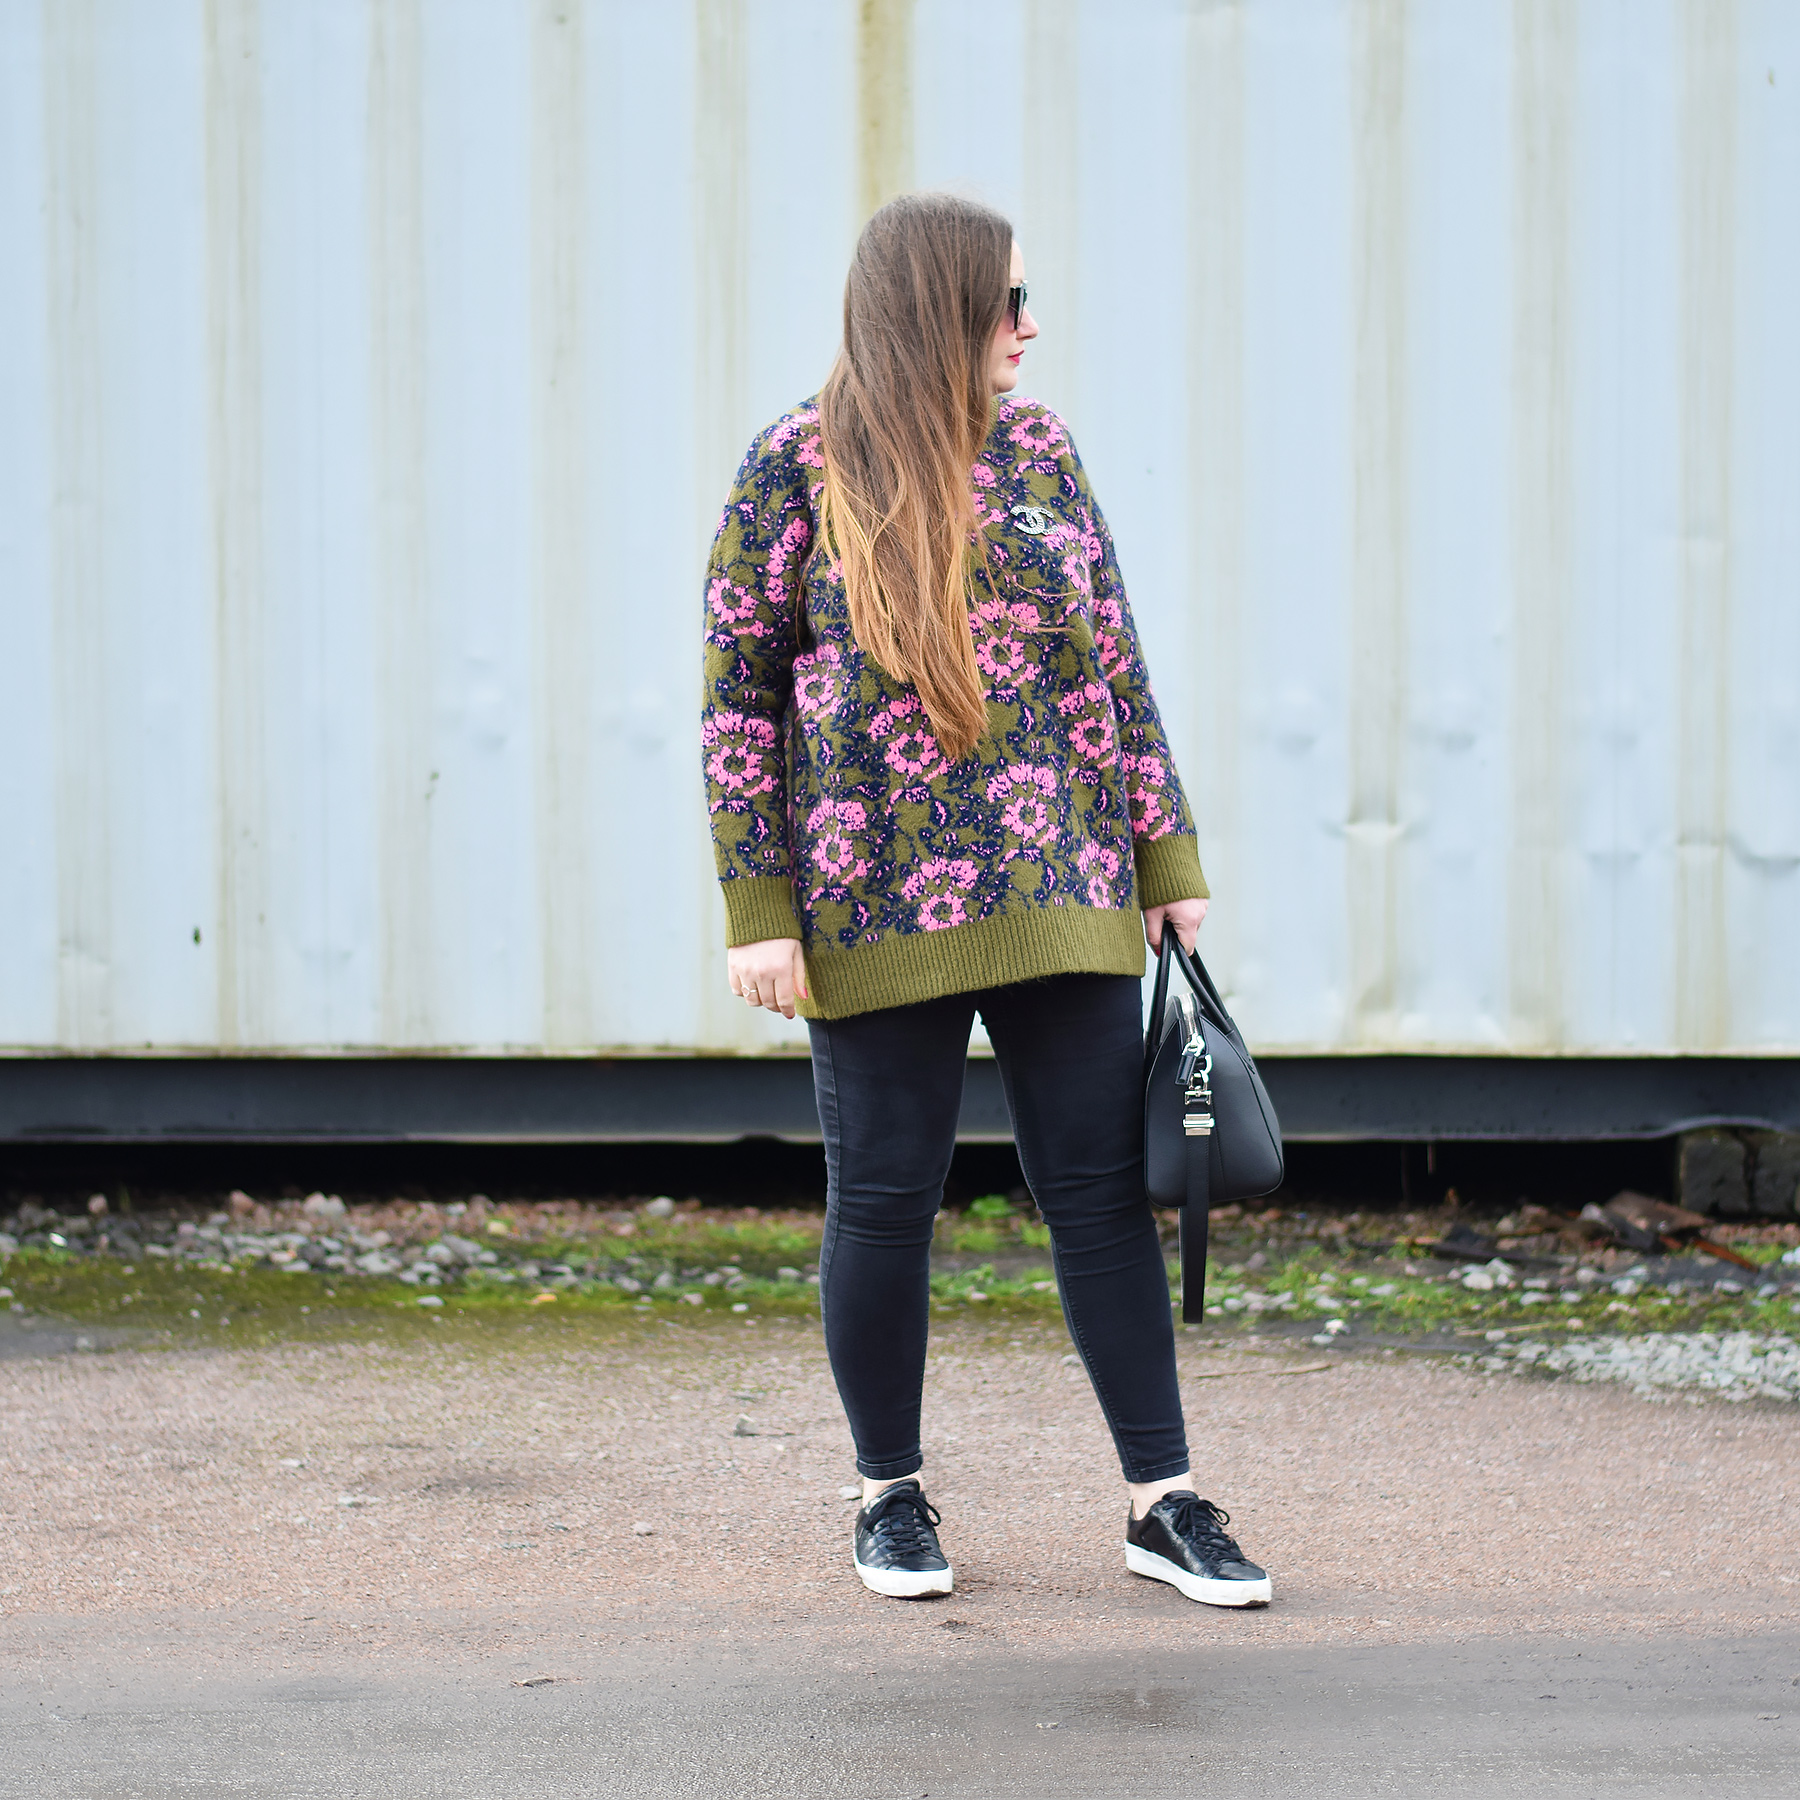 How to wear a floral jumper 2018